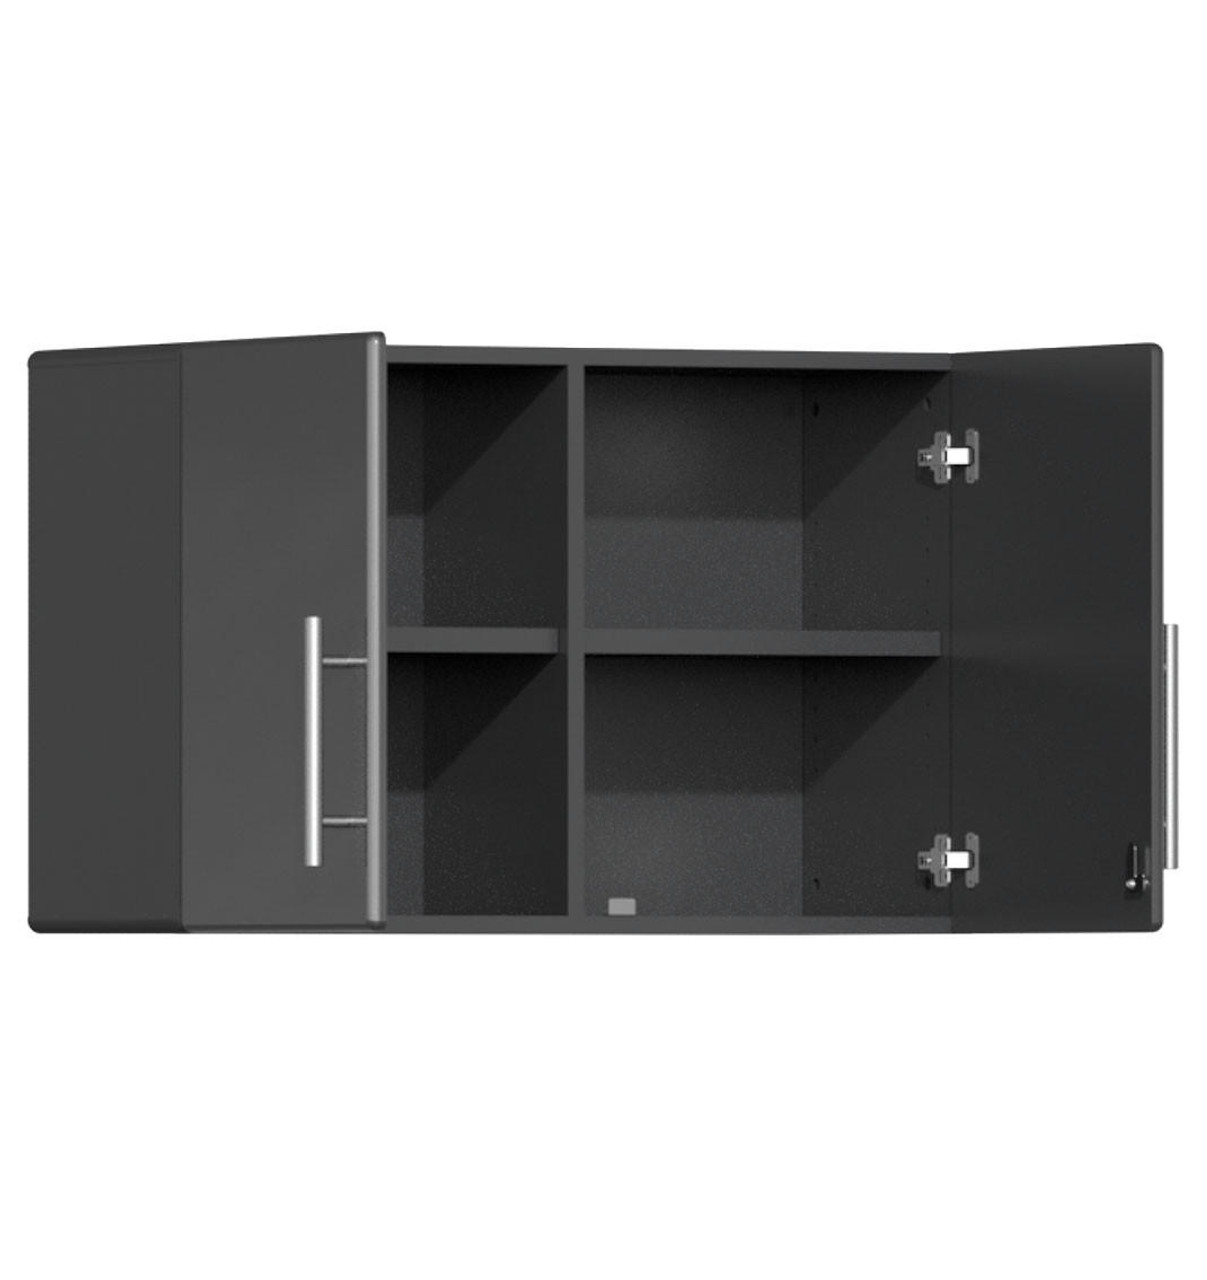 UltiMate Ulti-Mate Series 2.0 2-Door Partitioned Wall Cabinet